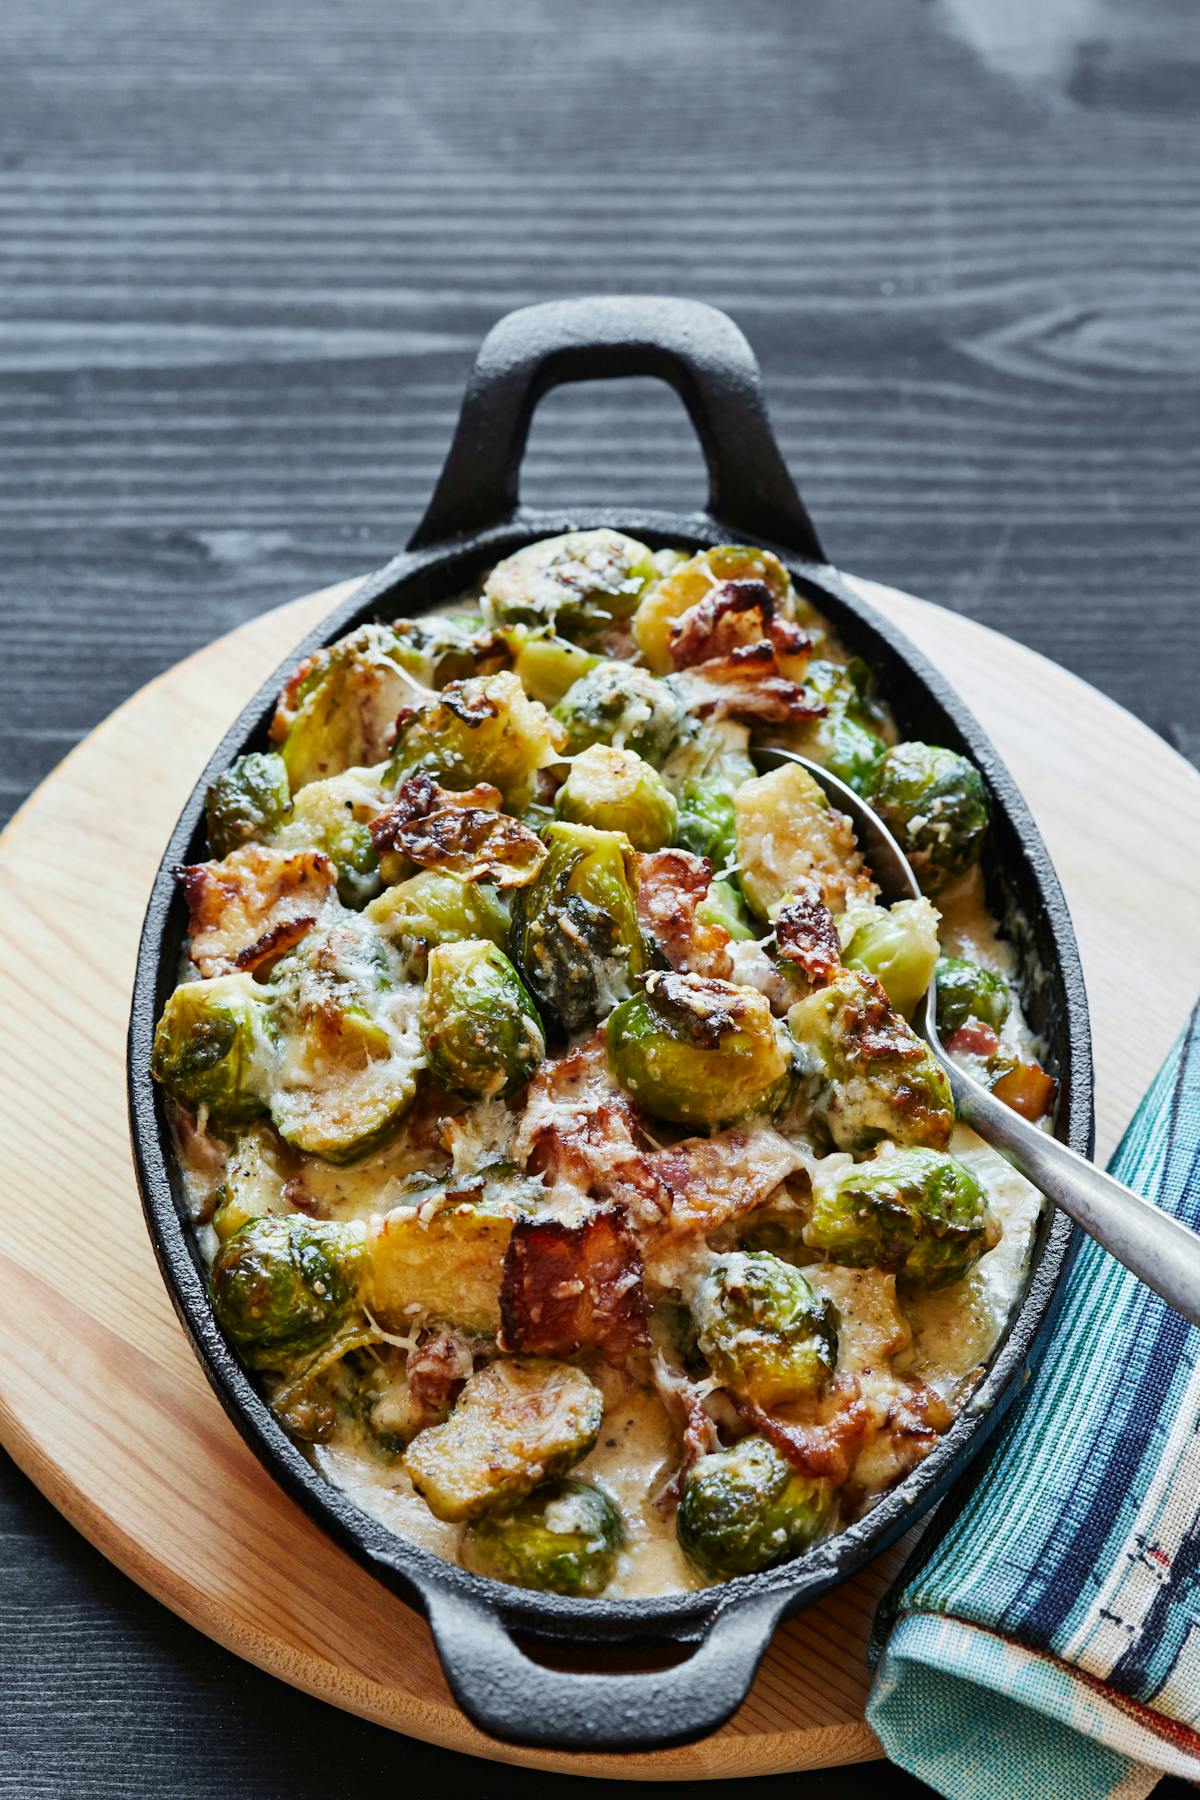 Brussels sprouts and bacon in a creamy parmesan sauce